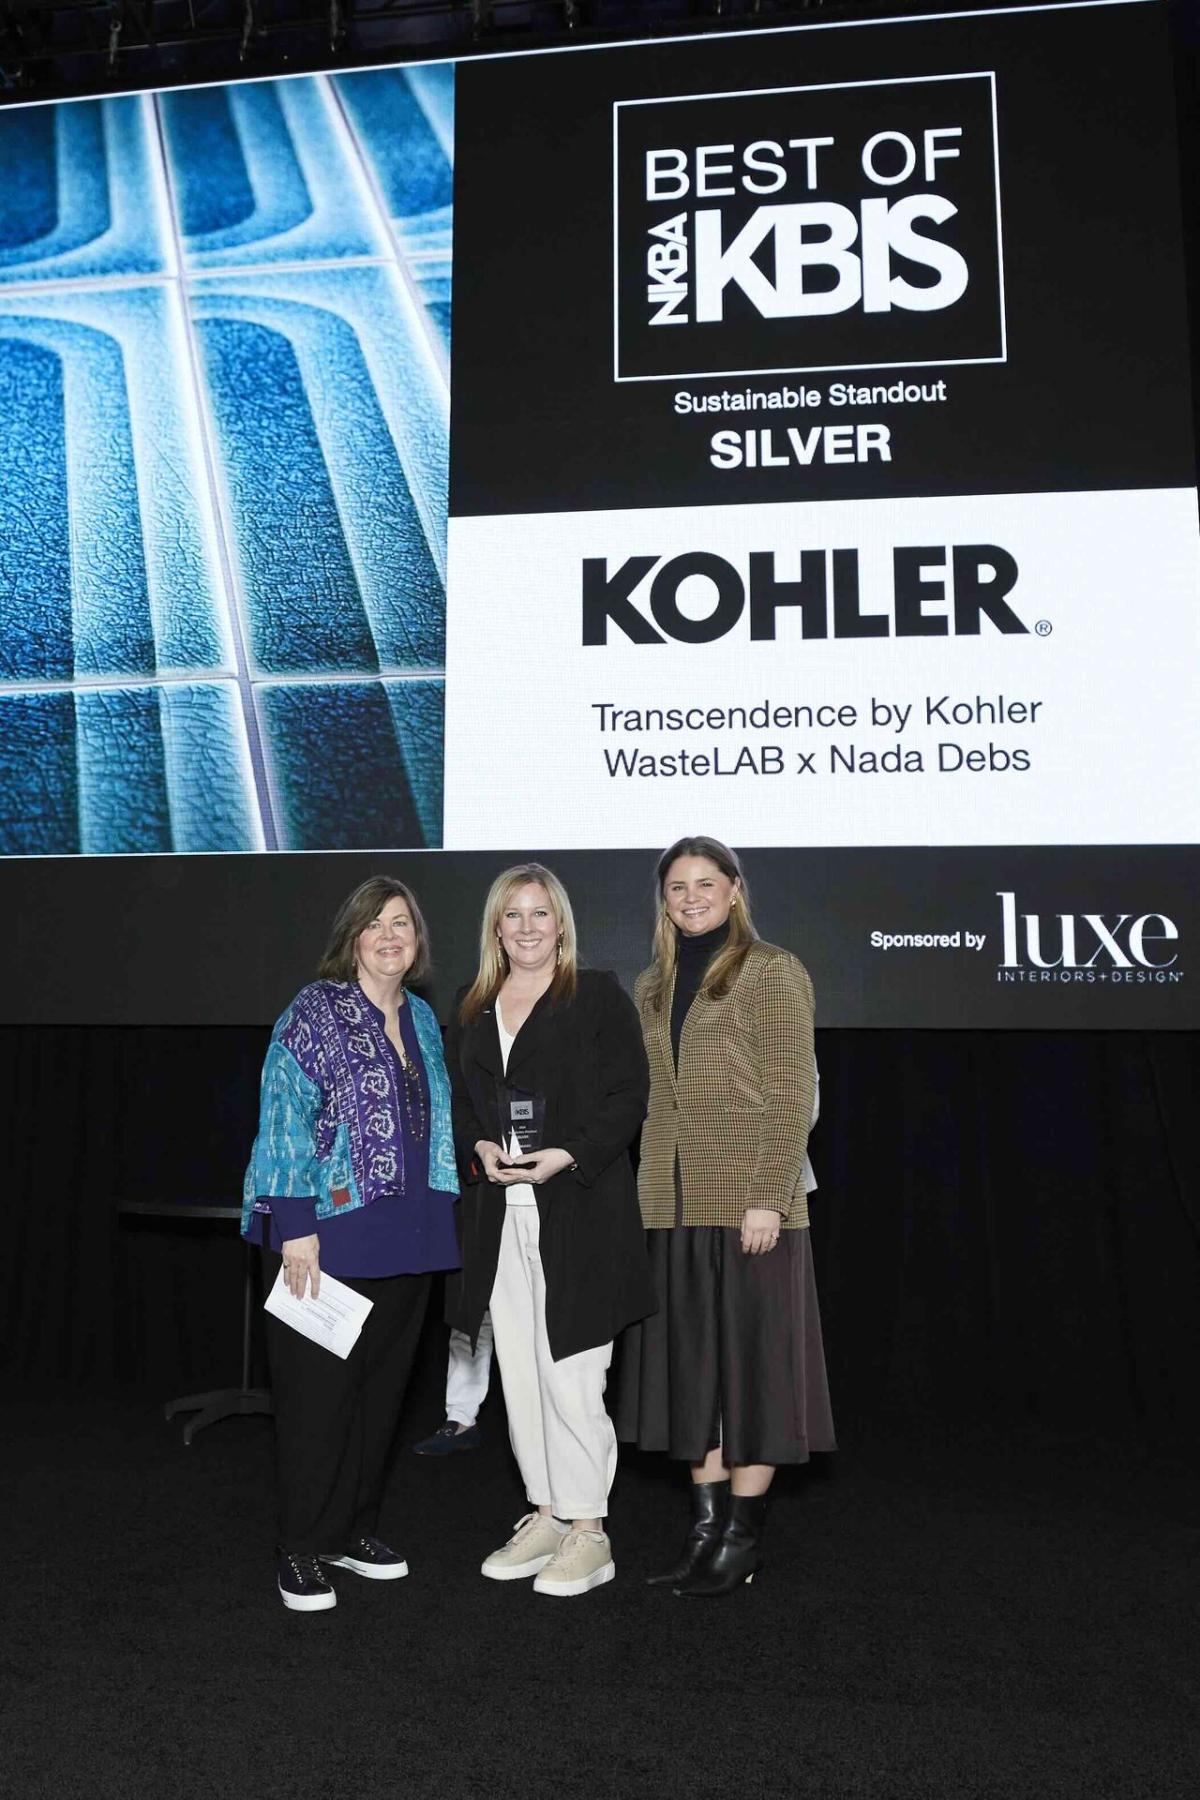 Three people in front of a sign "Best of KBIS Silver. Kohler"